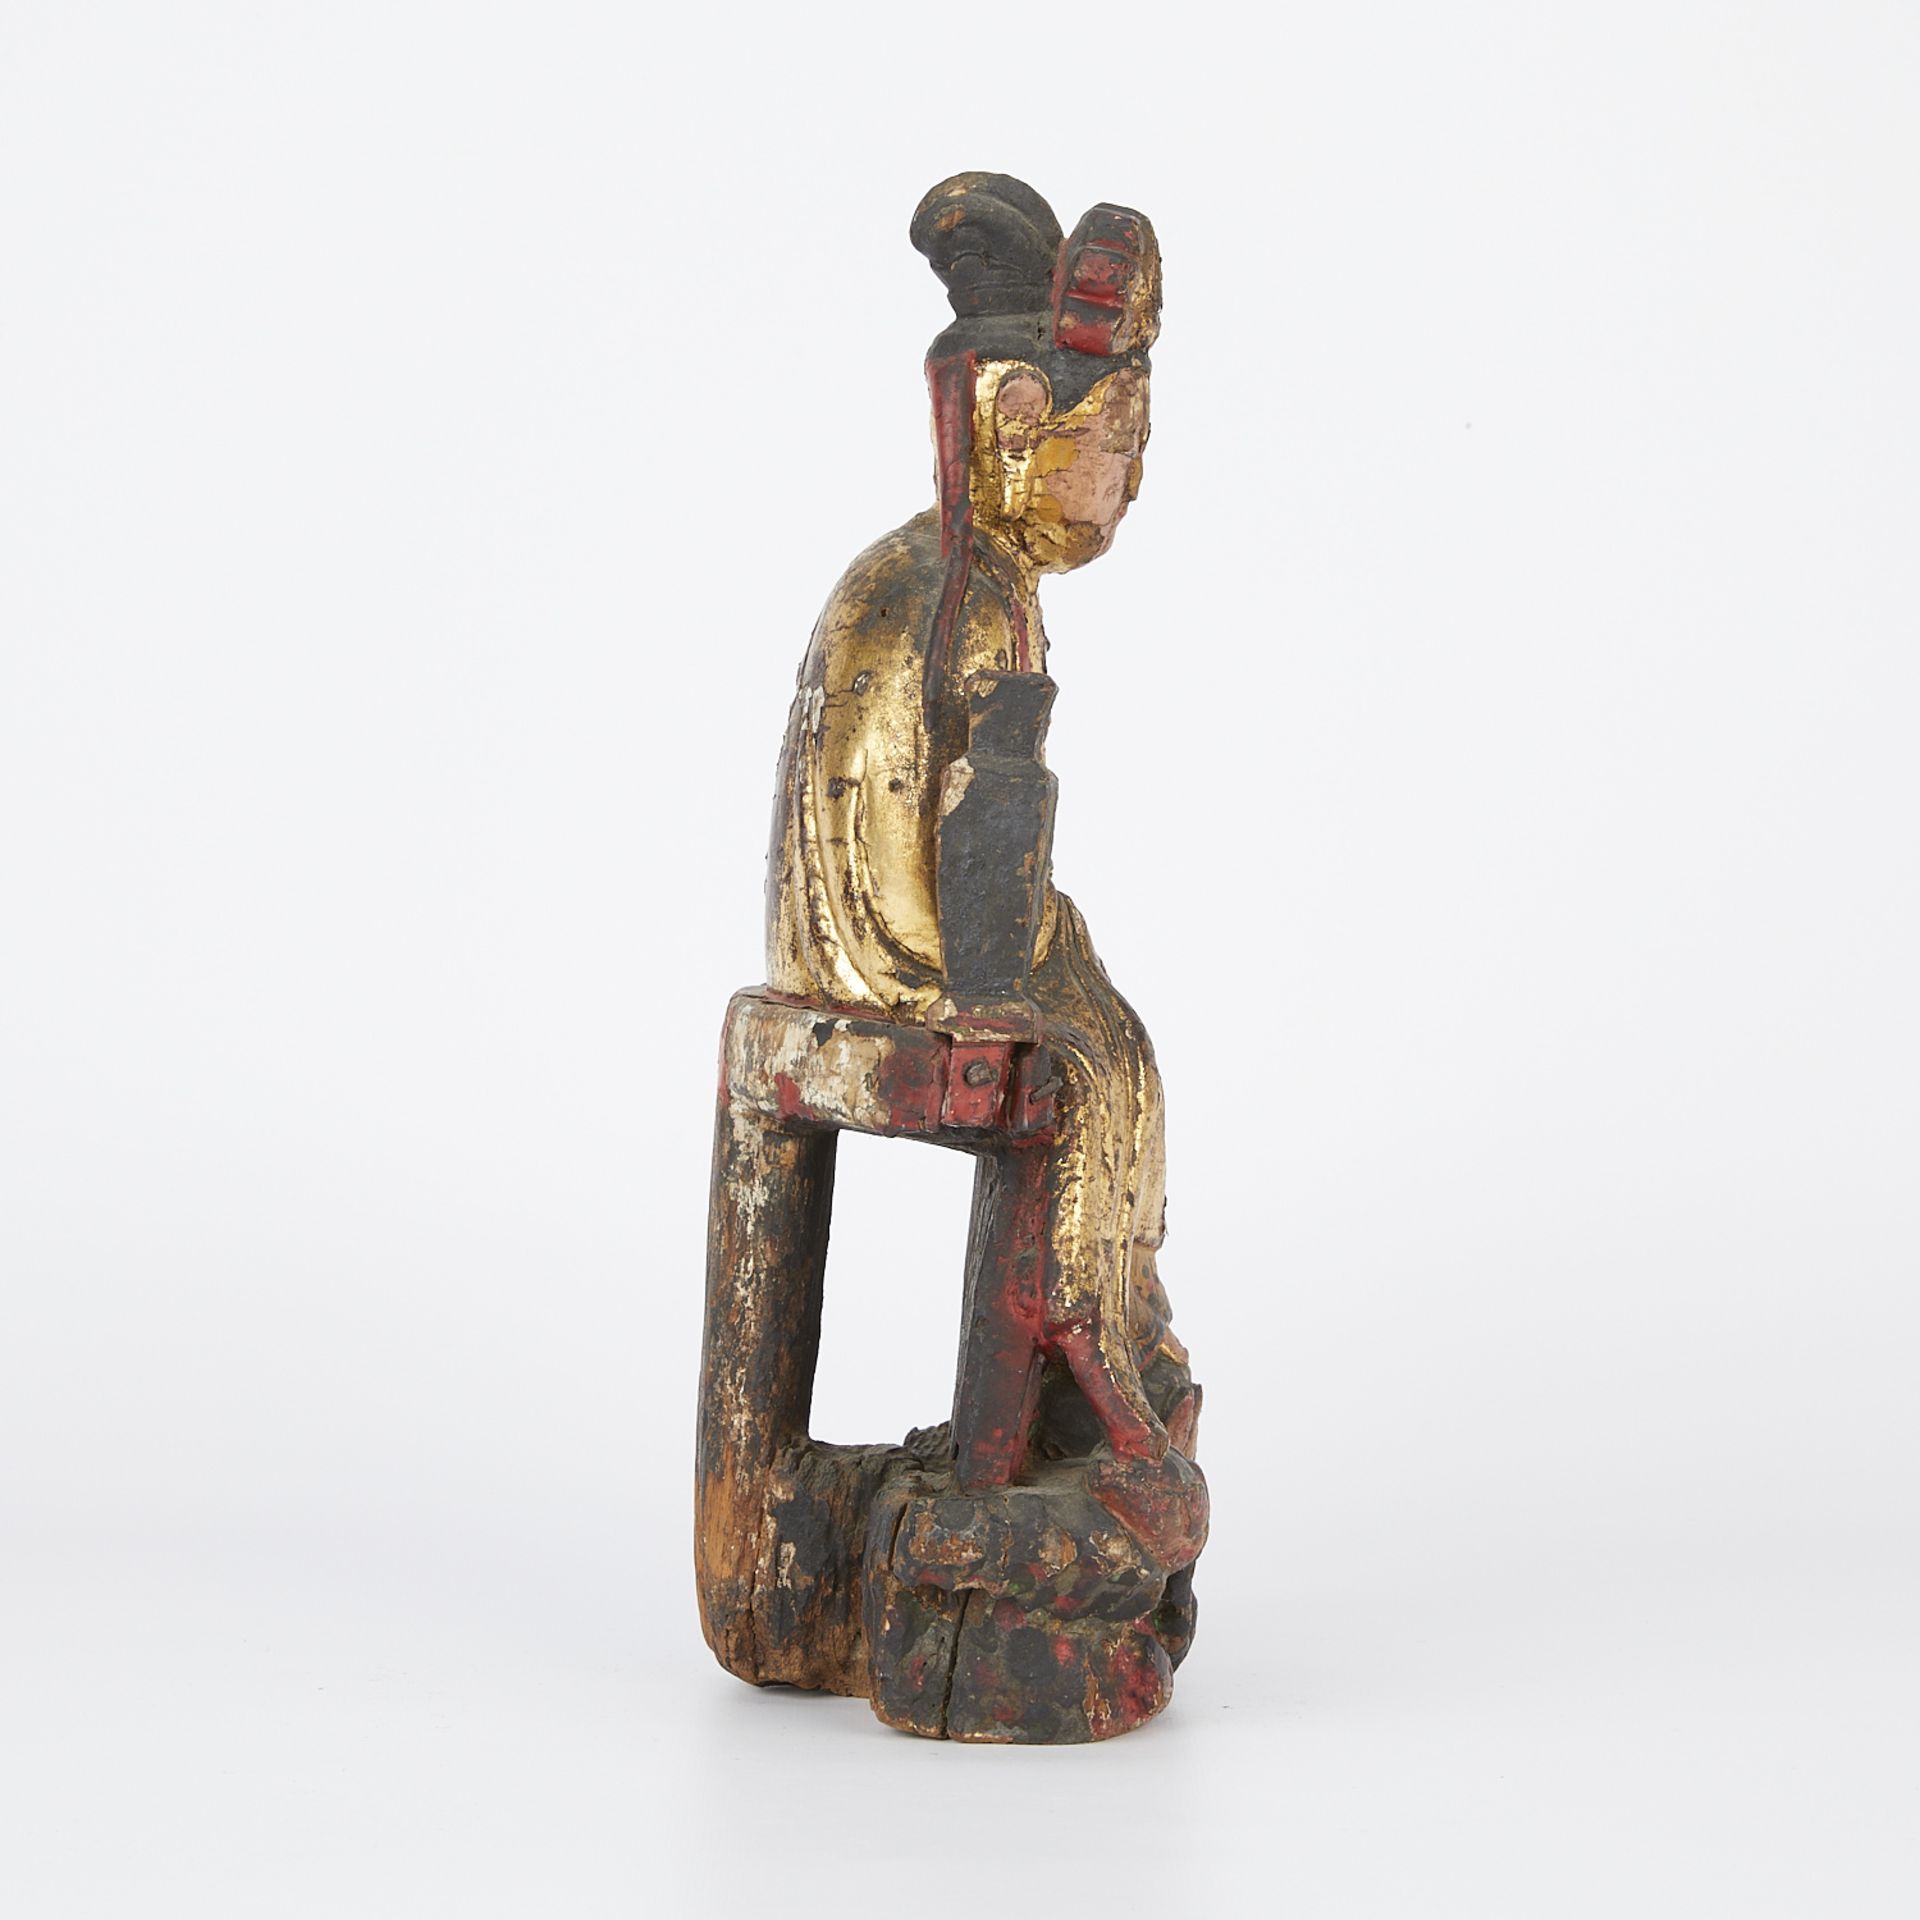 18th-19th c. Chinese Gilt Wooden Guanyin - Image 5 of 9